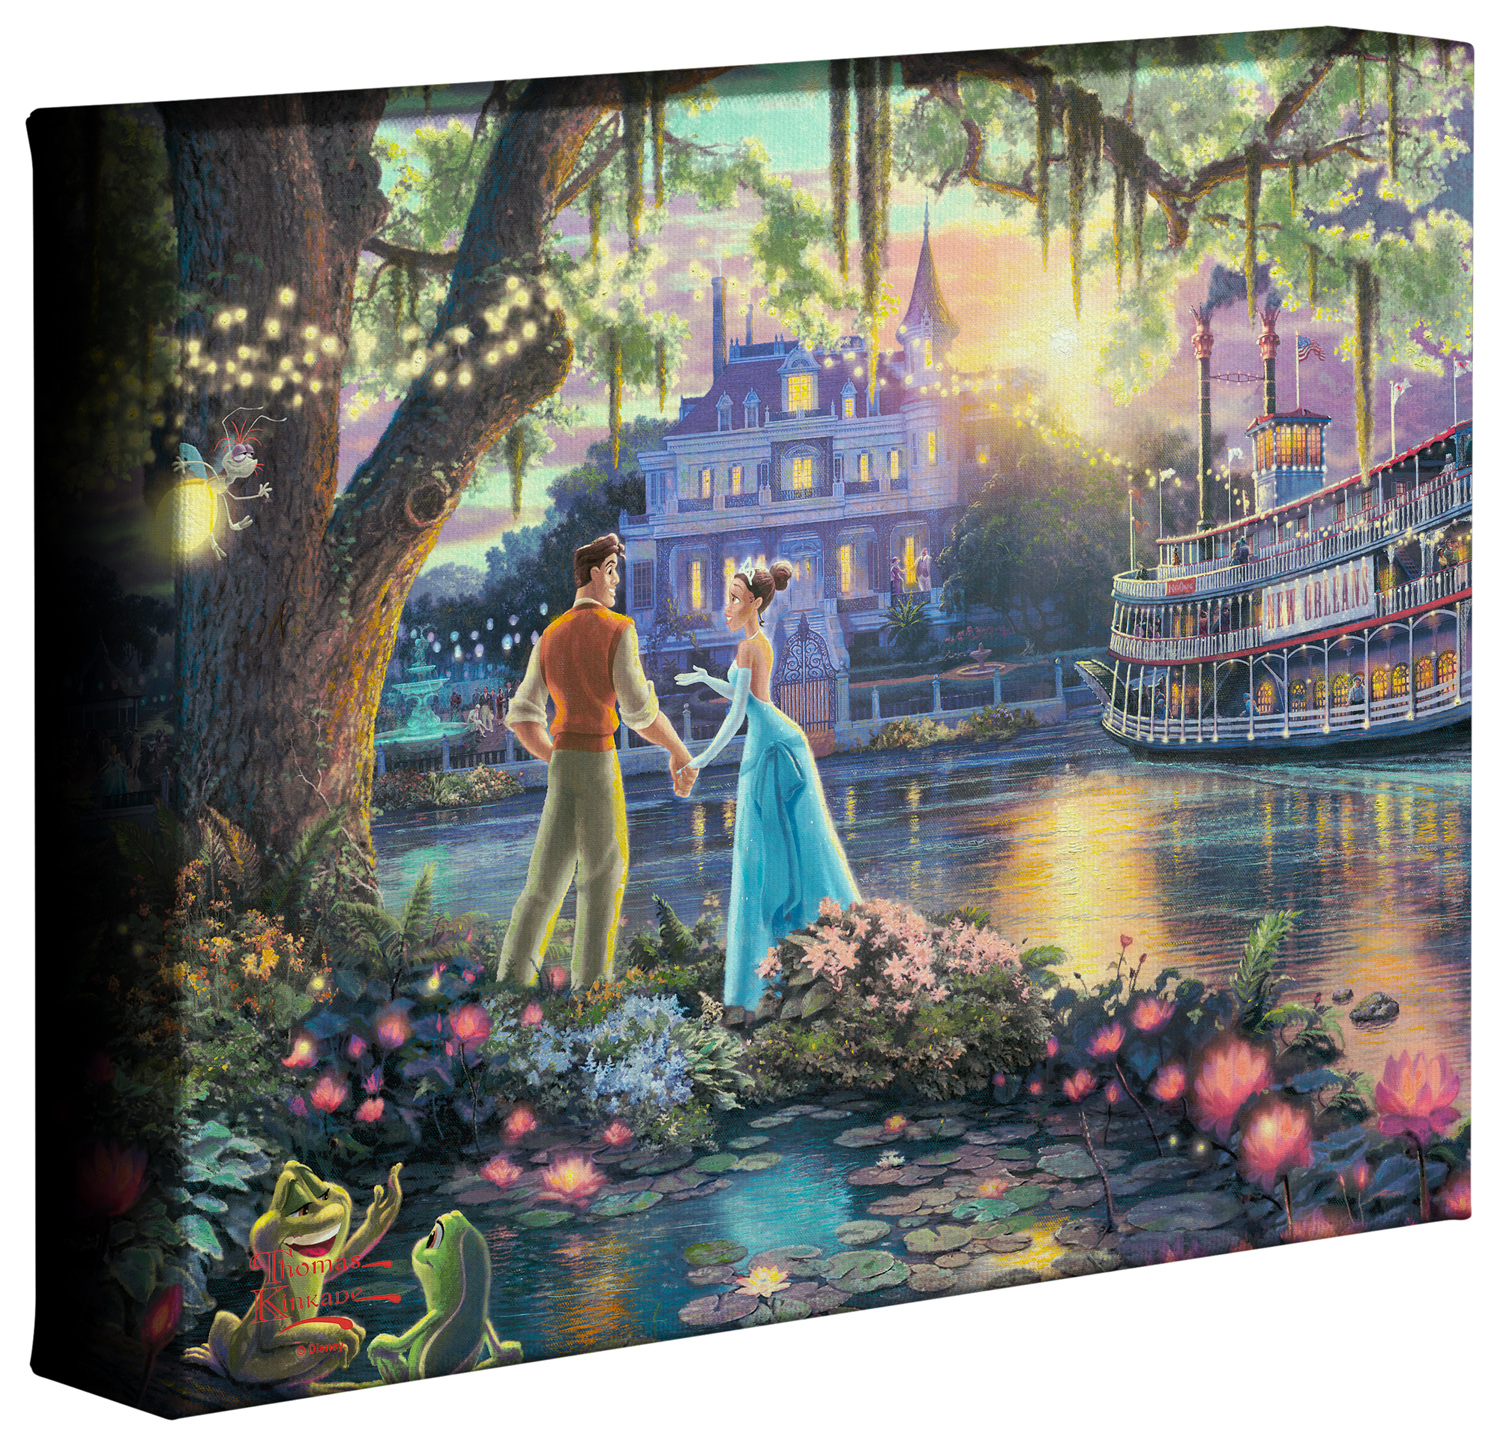 Princess and the Frog, The - 8 x 10 Gallery Wrapped Canvas Art